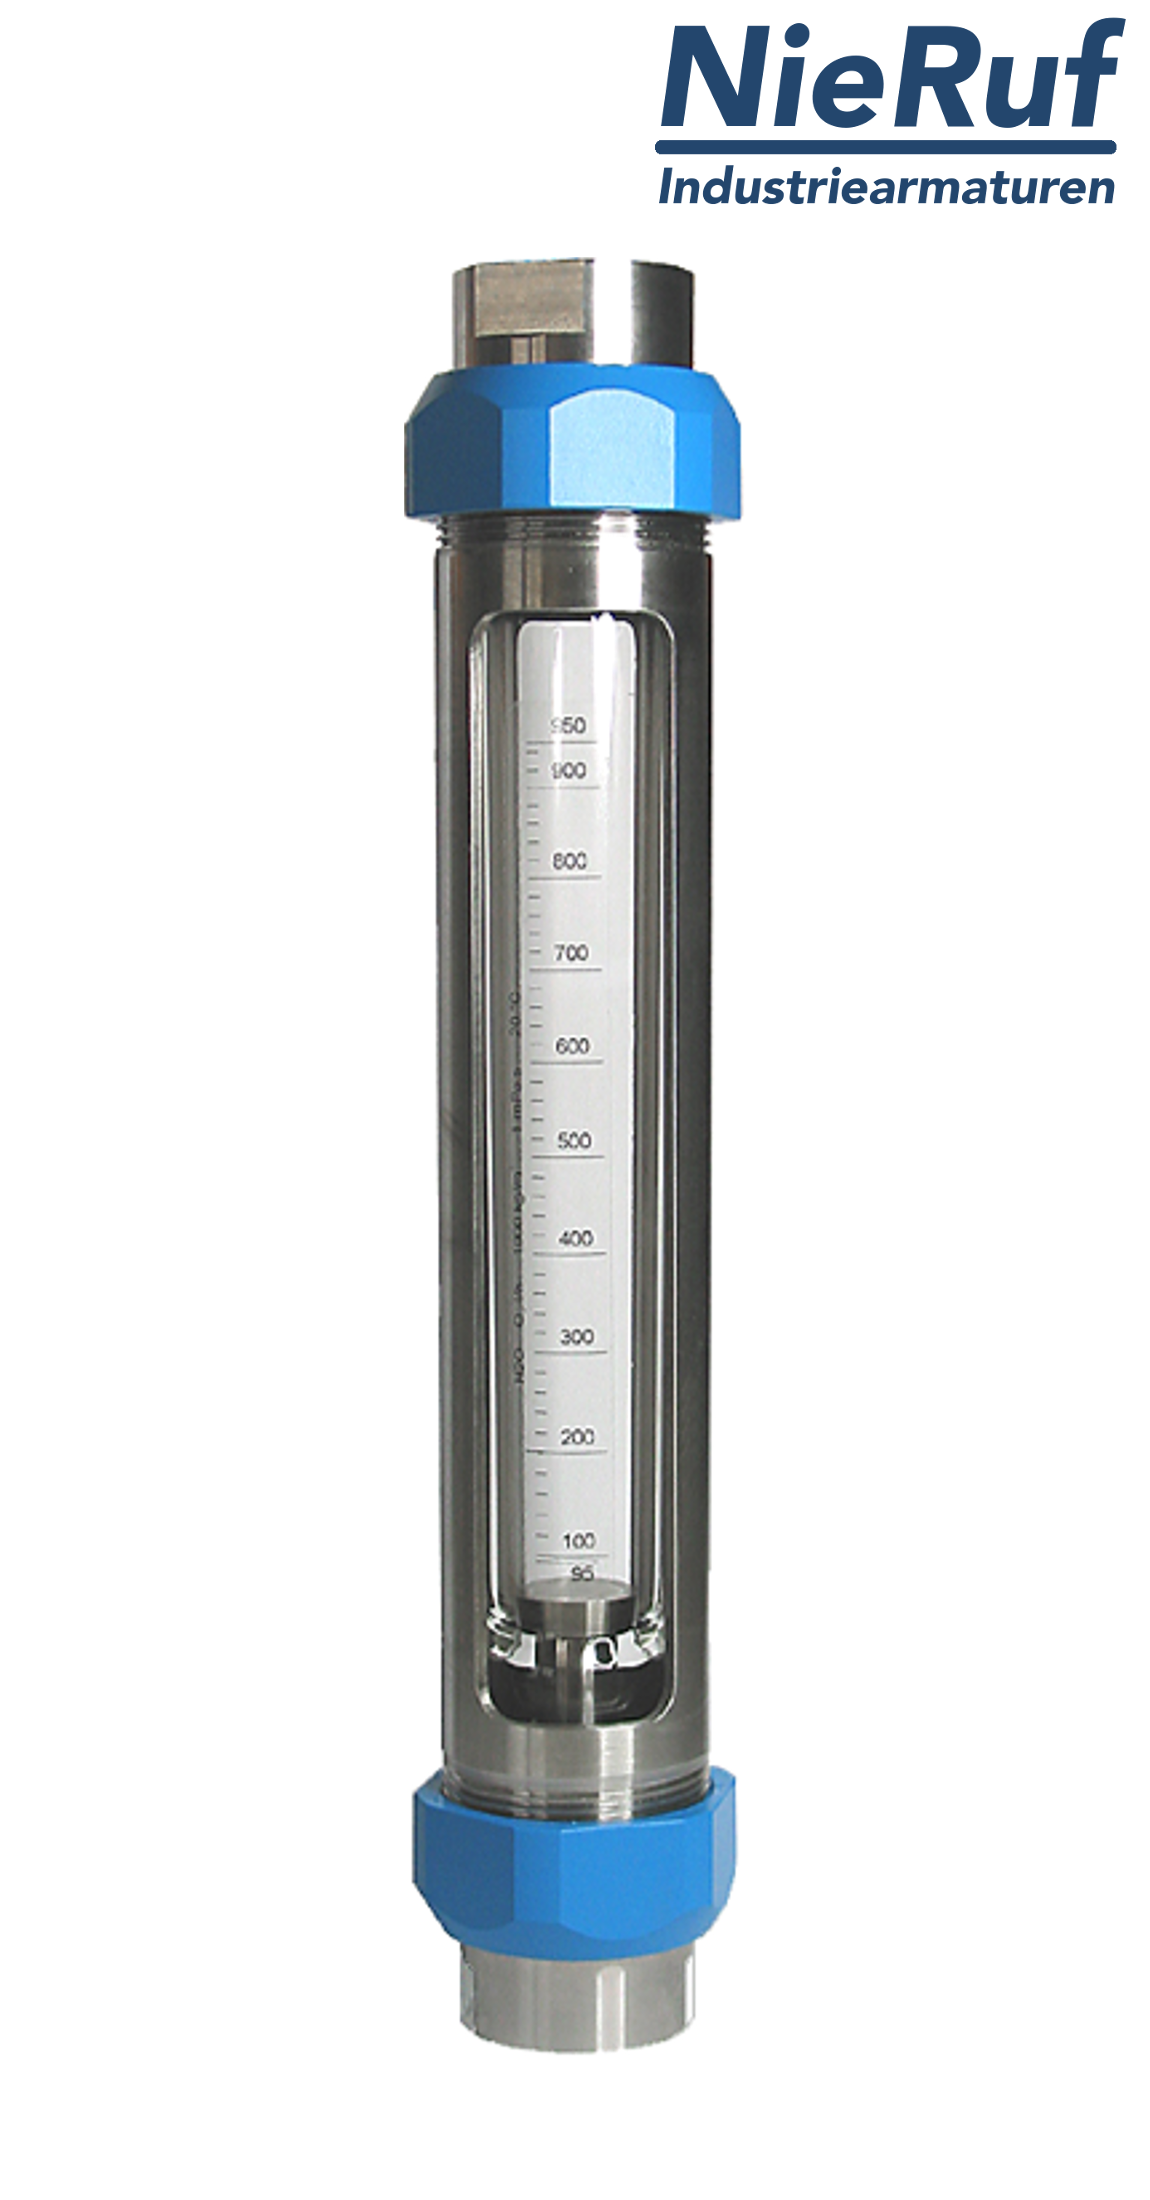 Variable area flowmeter stainless steel + borosilicate 3/4" inch 100.0 - 1000 l/h water FKM